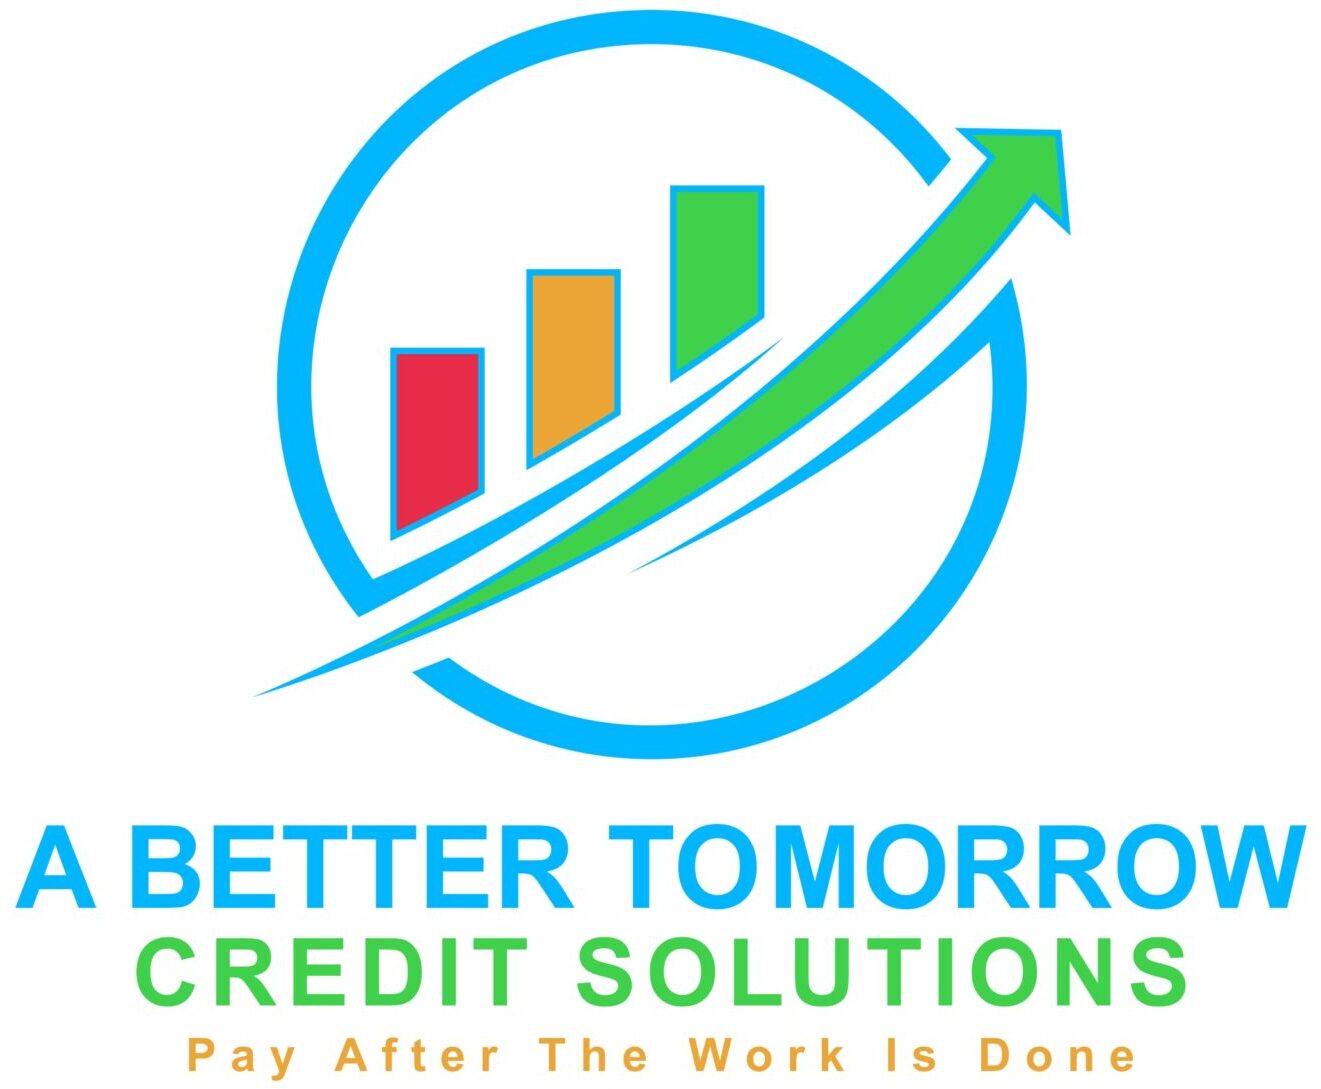 A BETTER TOMORROW CREDIT SOLUTIONS